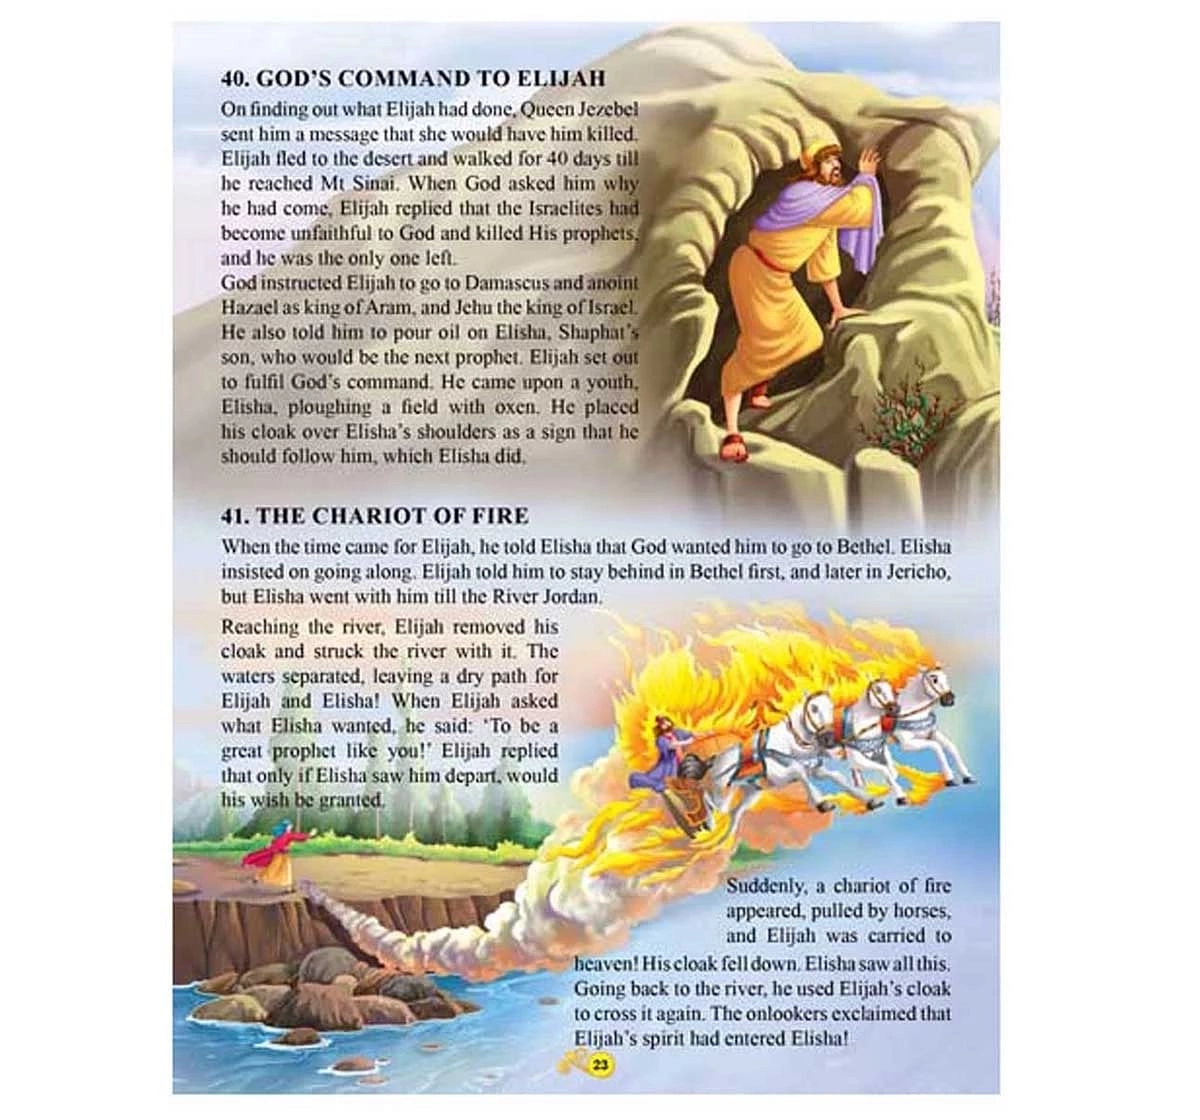 Dreamland Paper Back 101 Bible Stories Books for Kids 5Y+, Multicolour